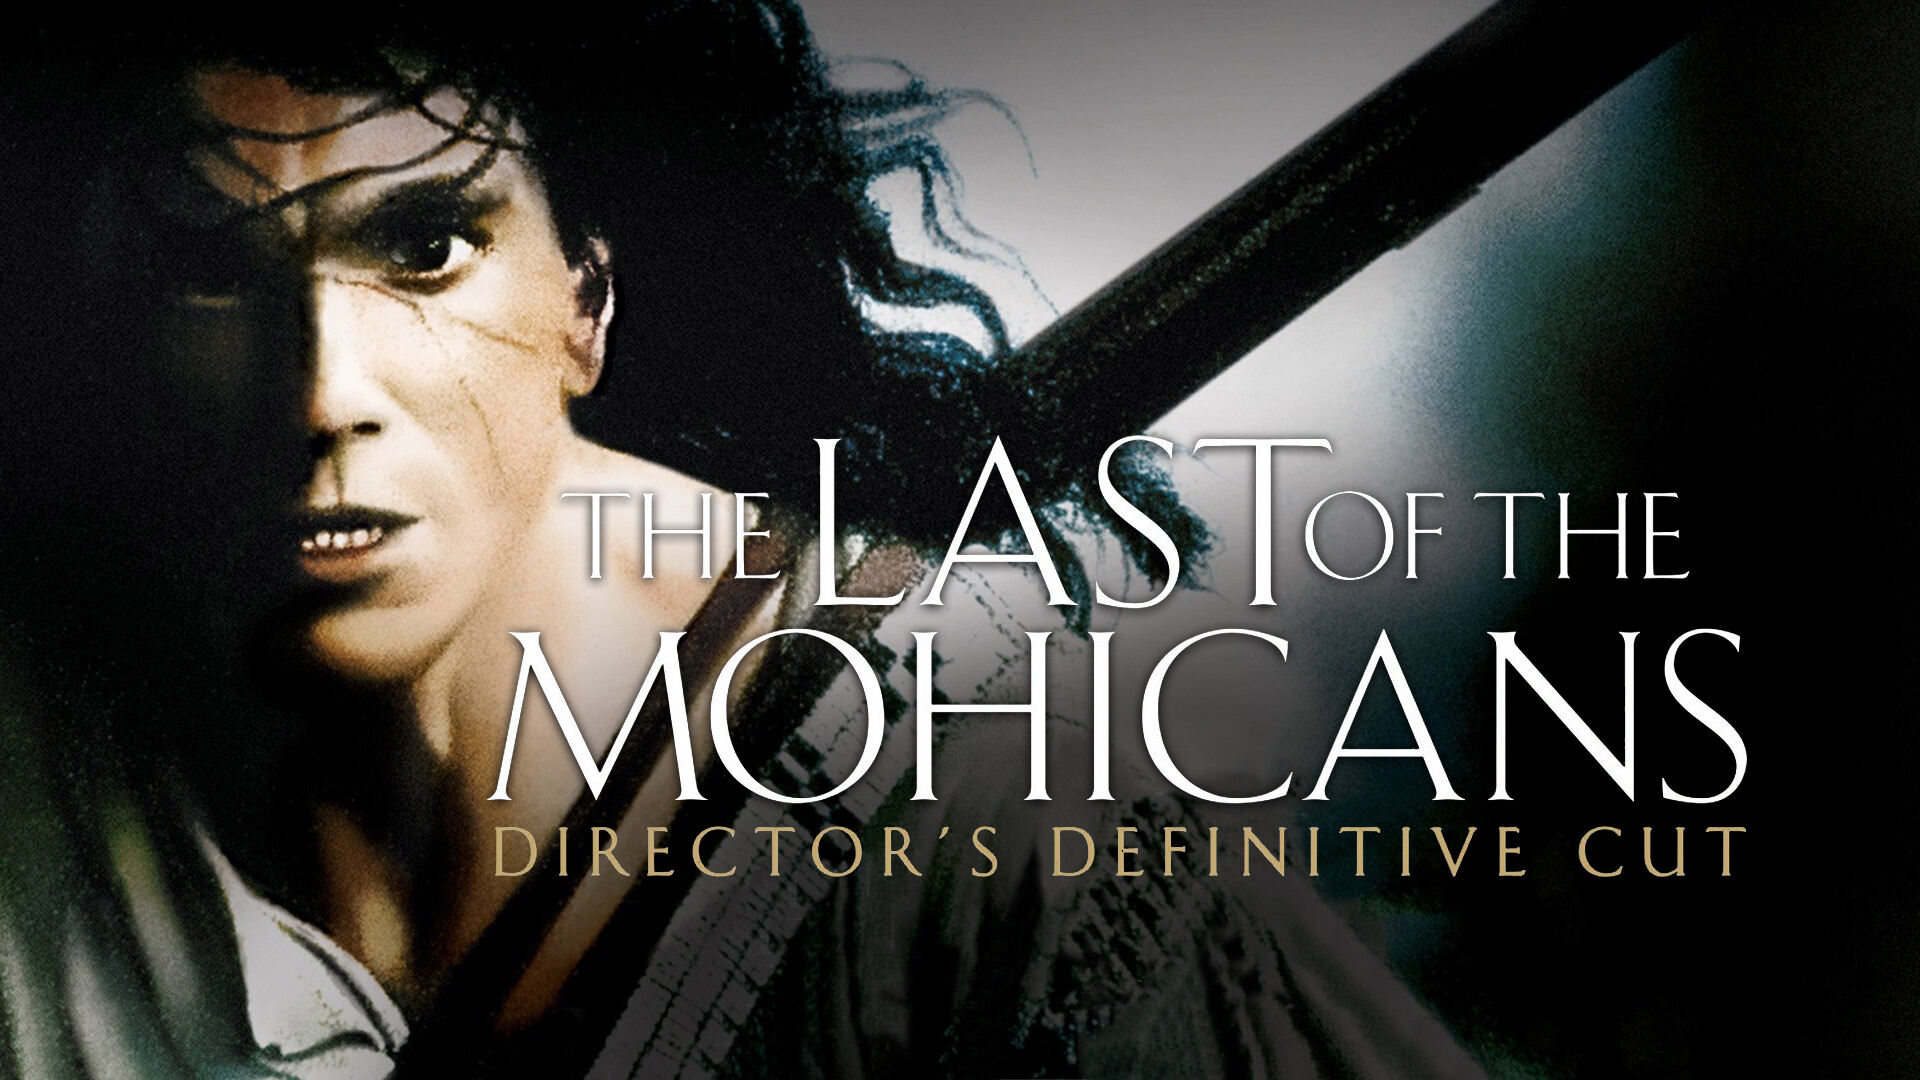 34-facts-about-the-movie-the-last-of-the-mohicans